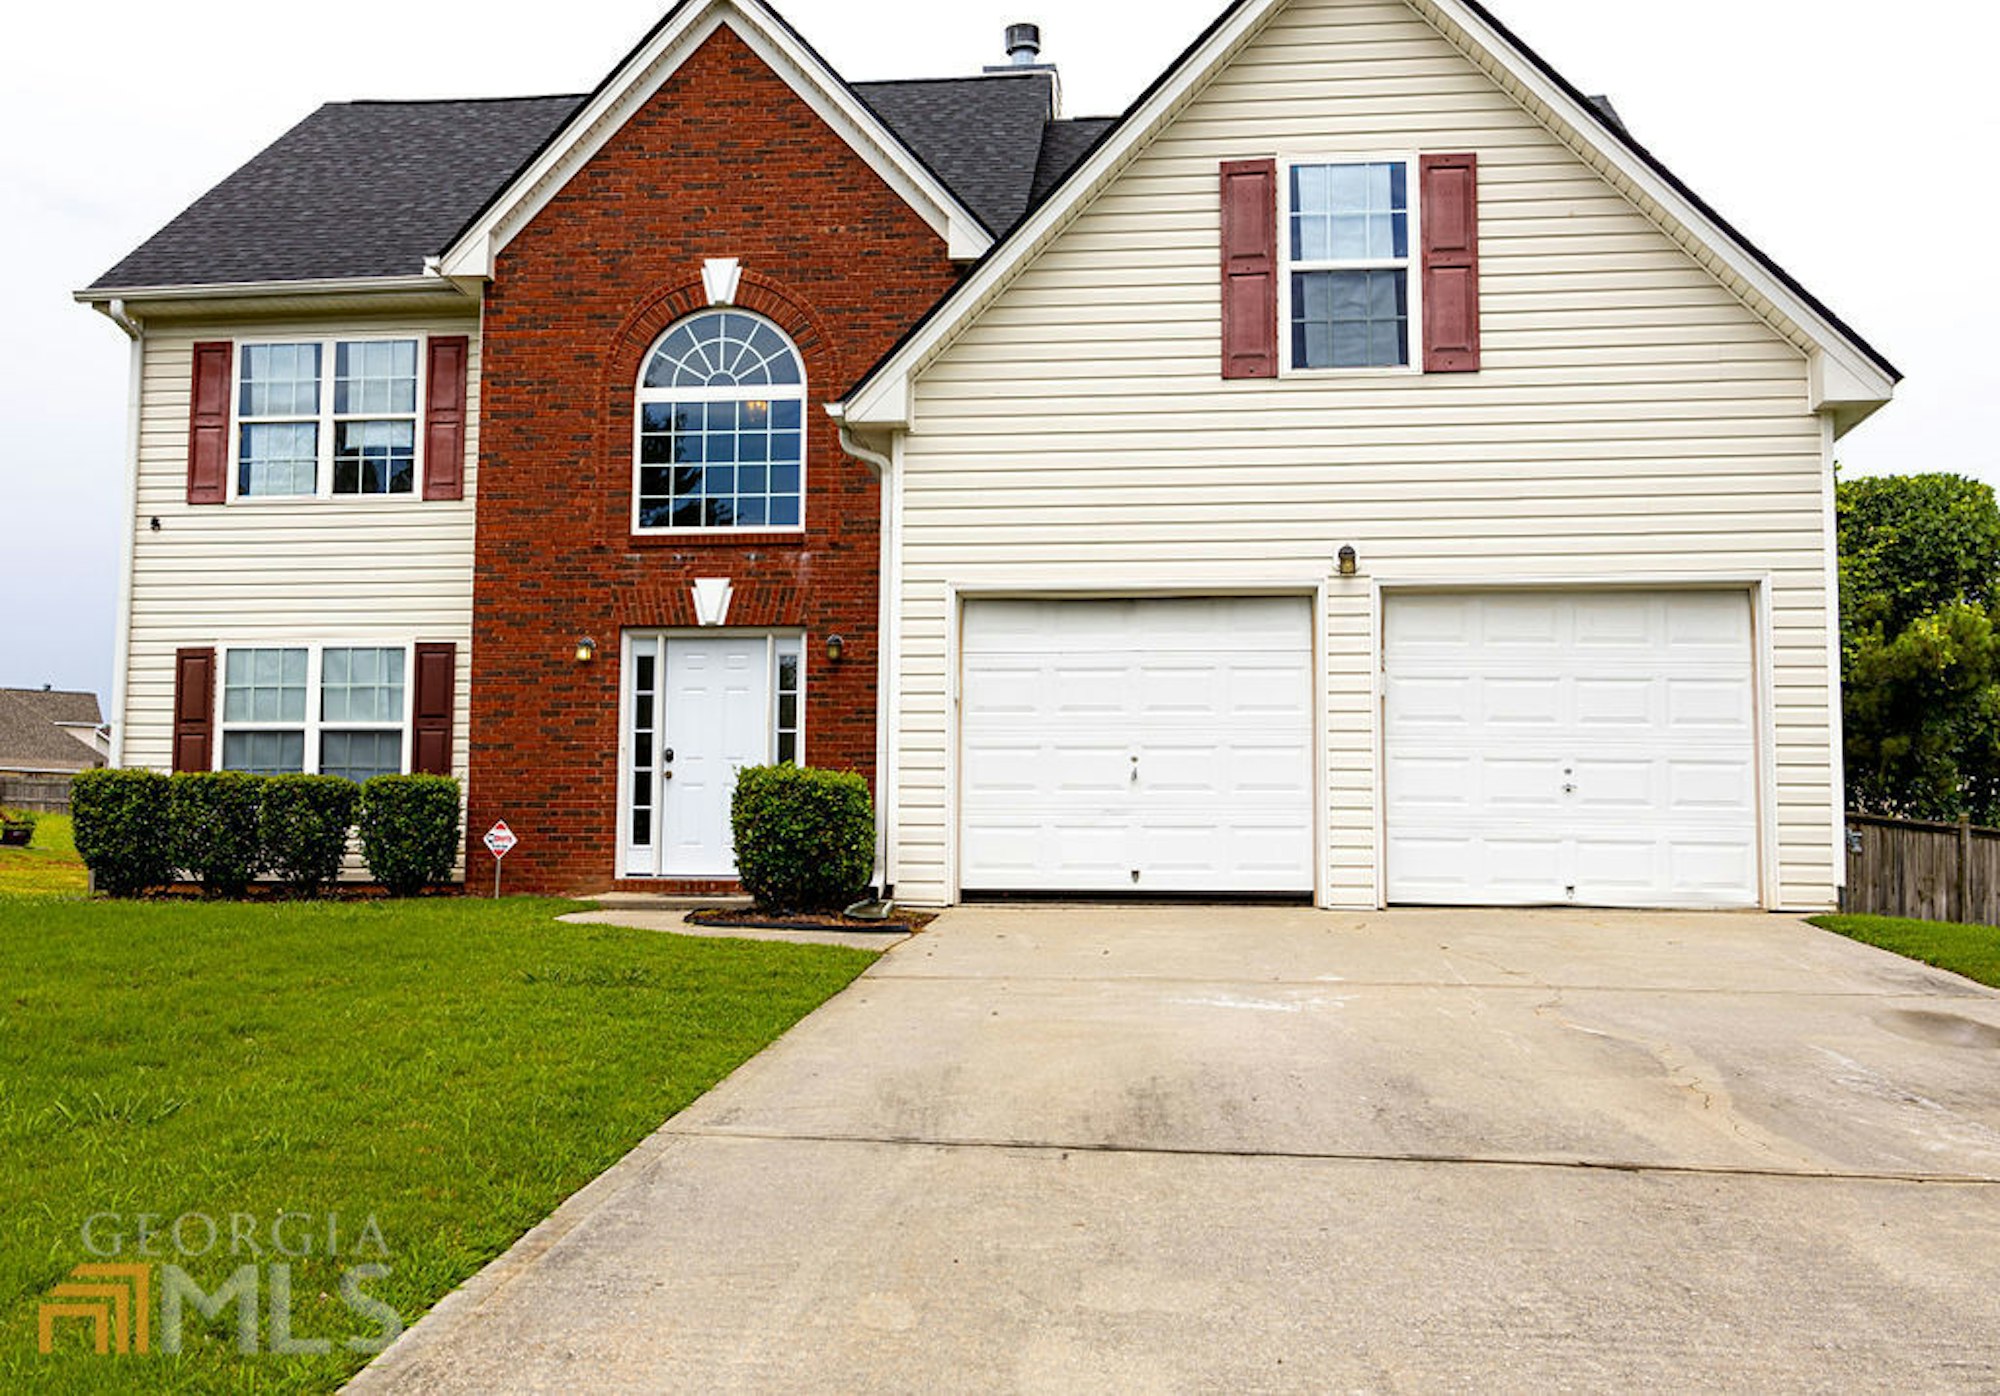 Photo 1 of 17 - 2787 Lakewater Way, Snellville, GA 30039